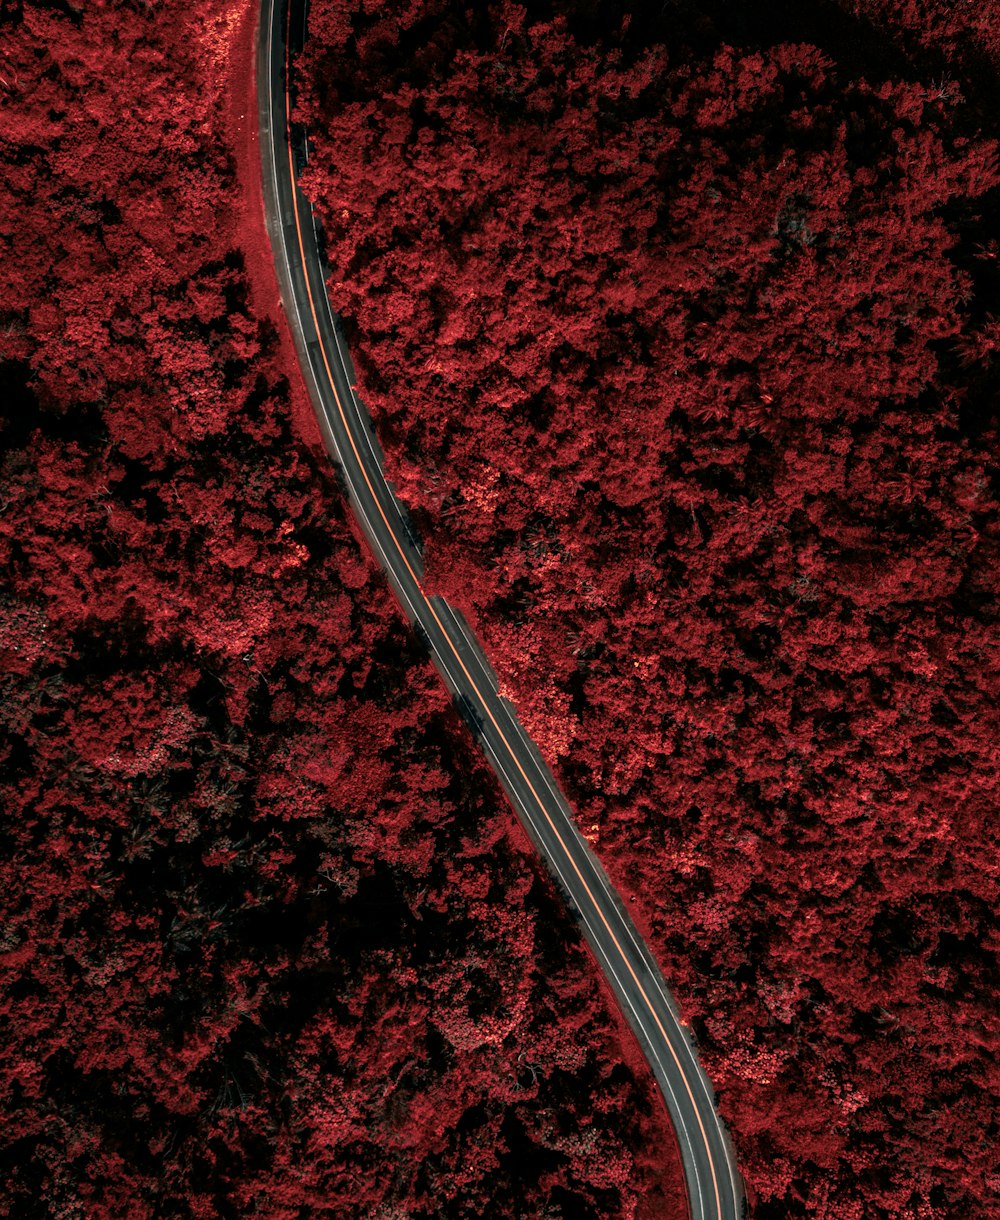 an aerial view of a road winding through a red forest